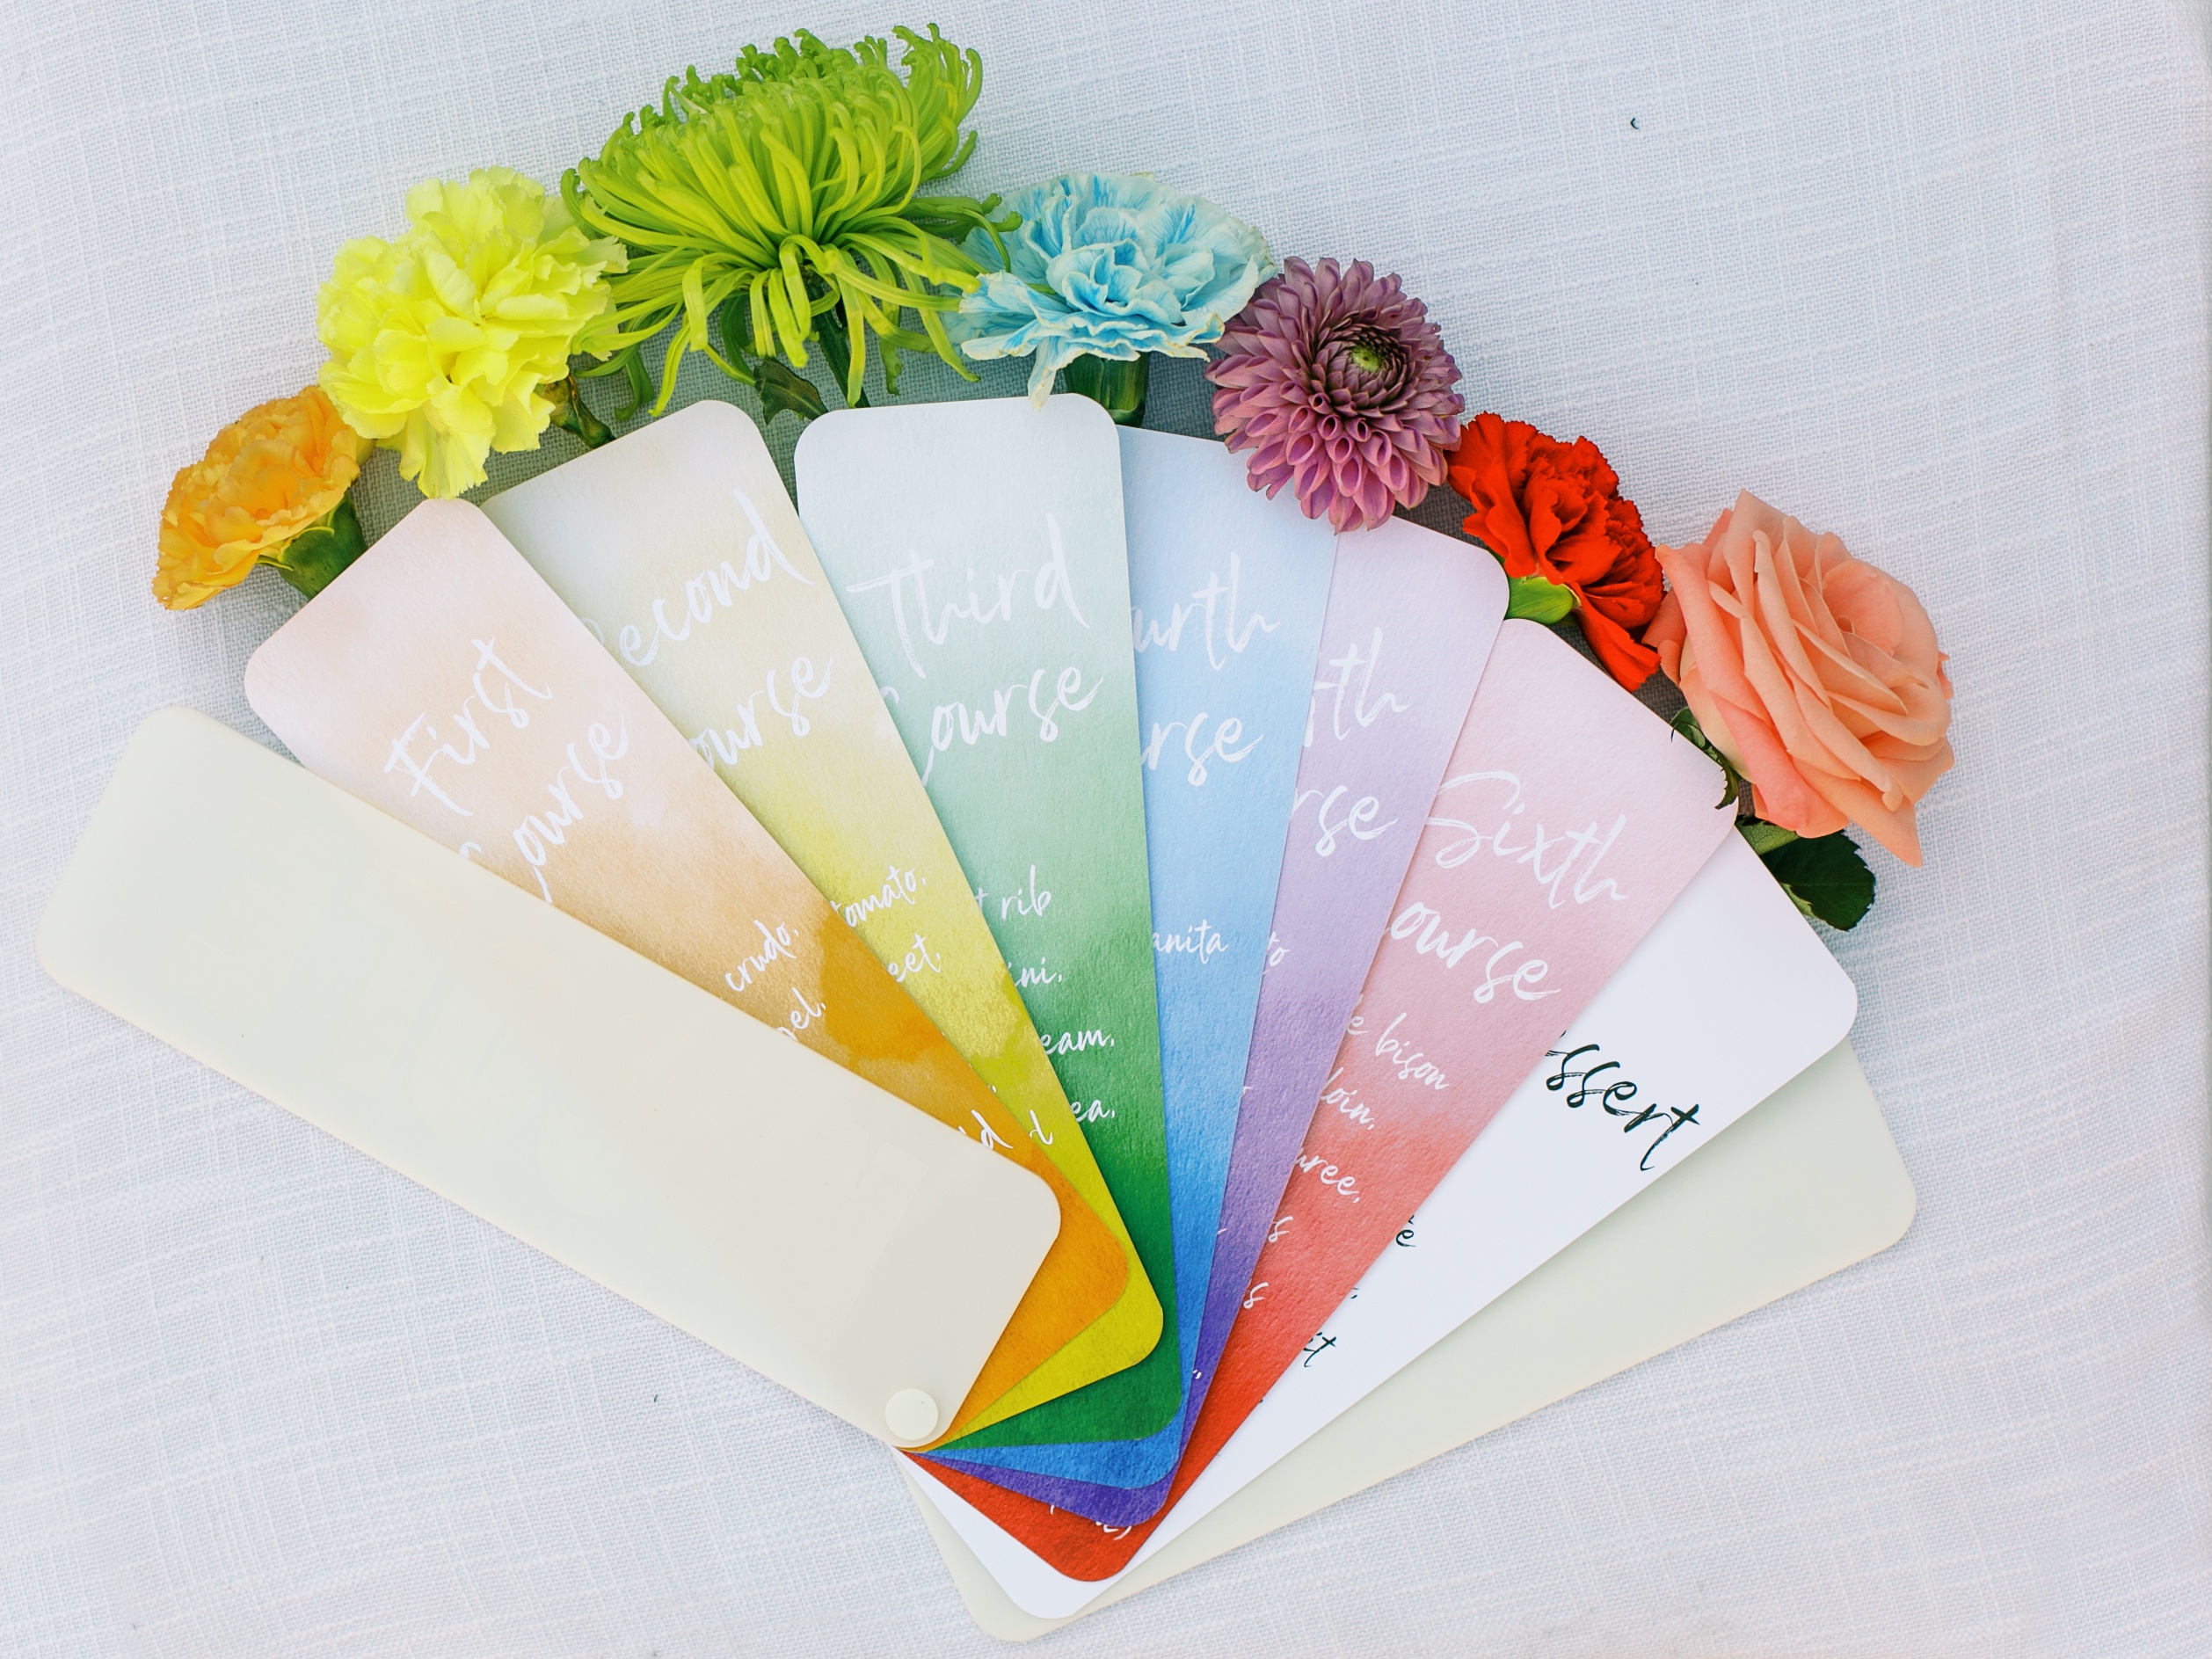 Thin rectangle menu cards are individually ombre with the darkest of the color at the bottom and getting lighter to the top. The cards have white text in a rainbow starting with orange and ending with red. Behind each card is a single flower that colors matches the card.